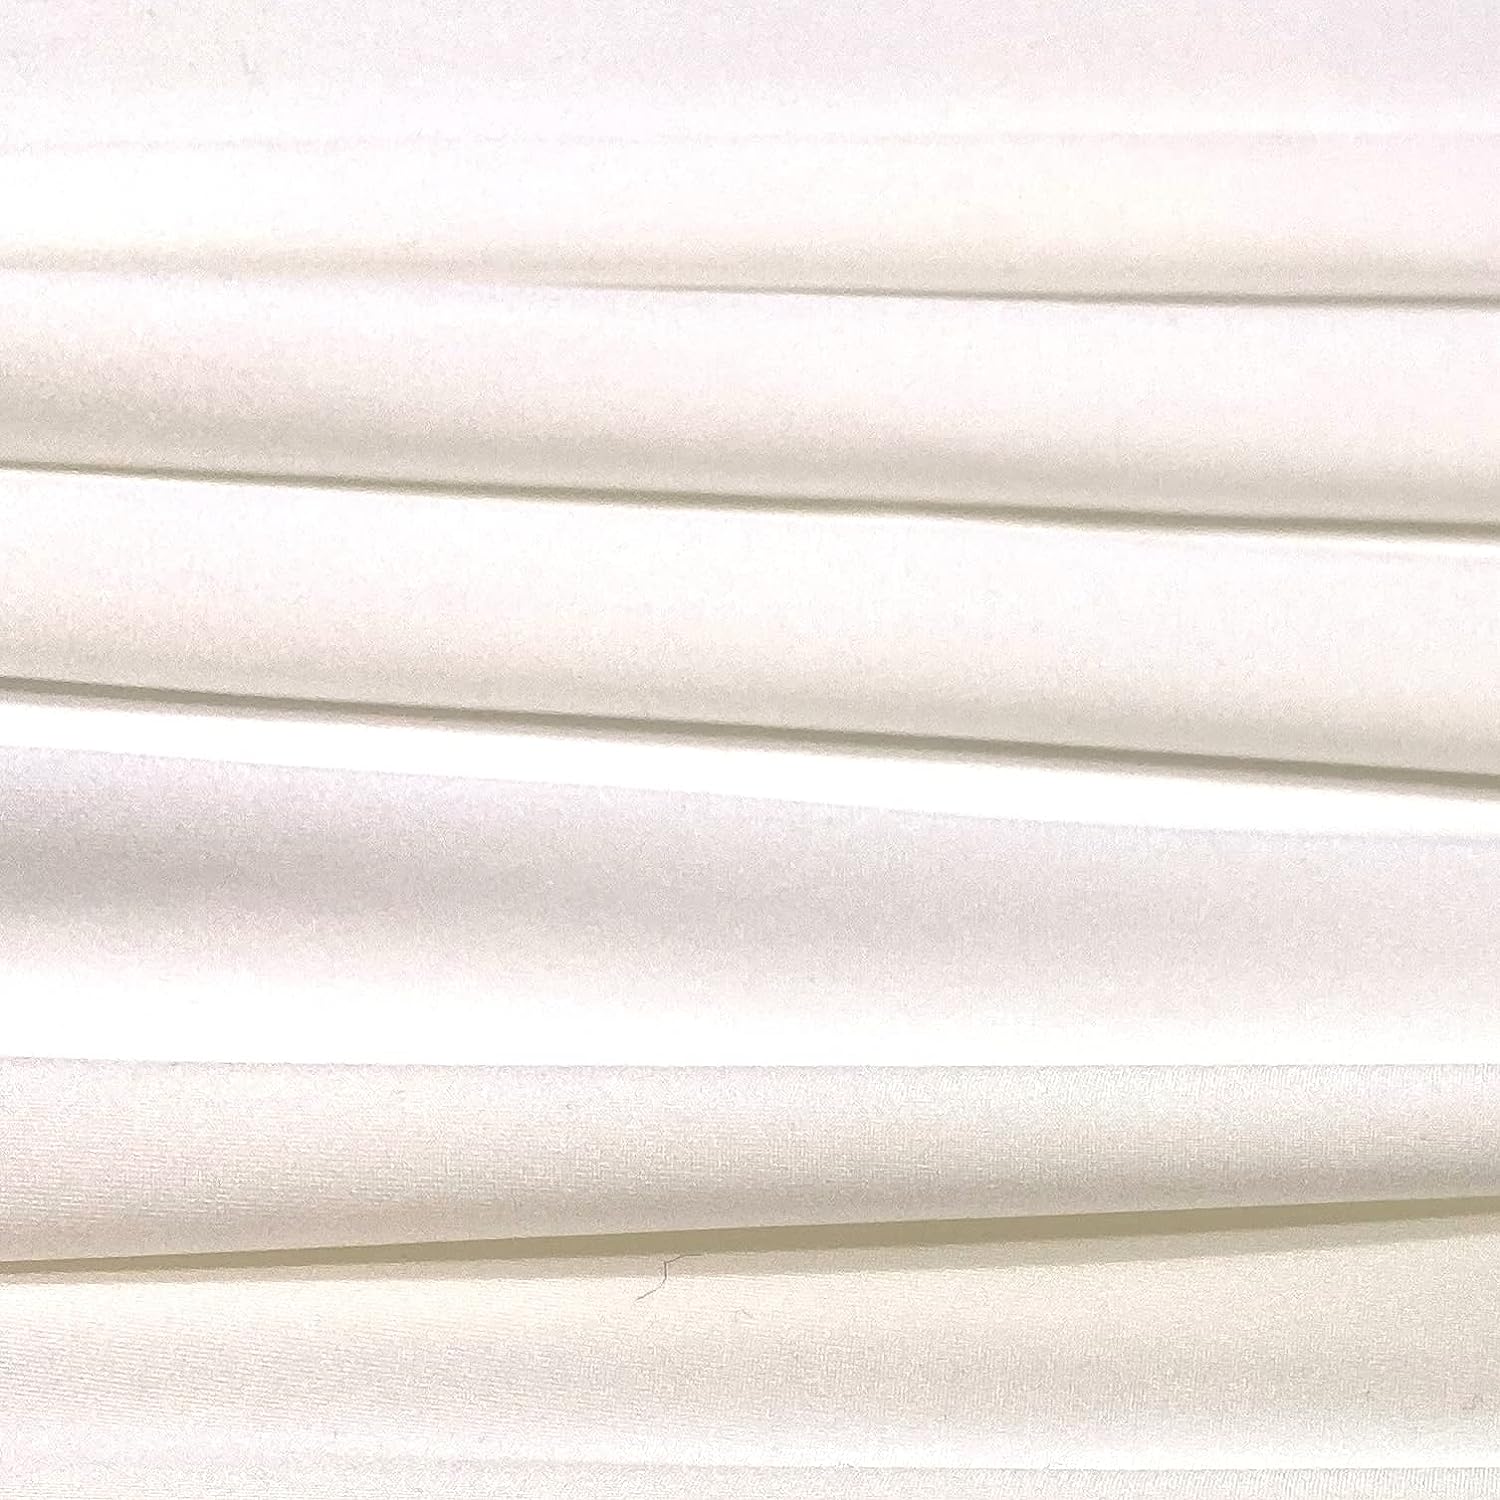 Off White Luxury Nylon Spandex Fabric By The YardICE FABRICSICE FABRICSBy The Yard (58" Width)Off White Luxury Nylon Spandex Fabric By The Yard ICE FABRICS